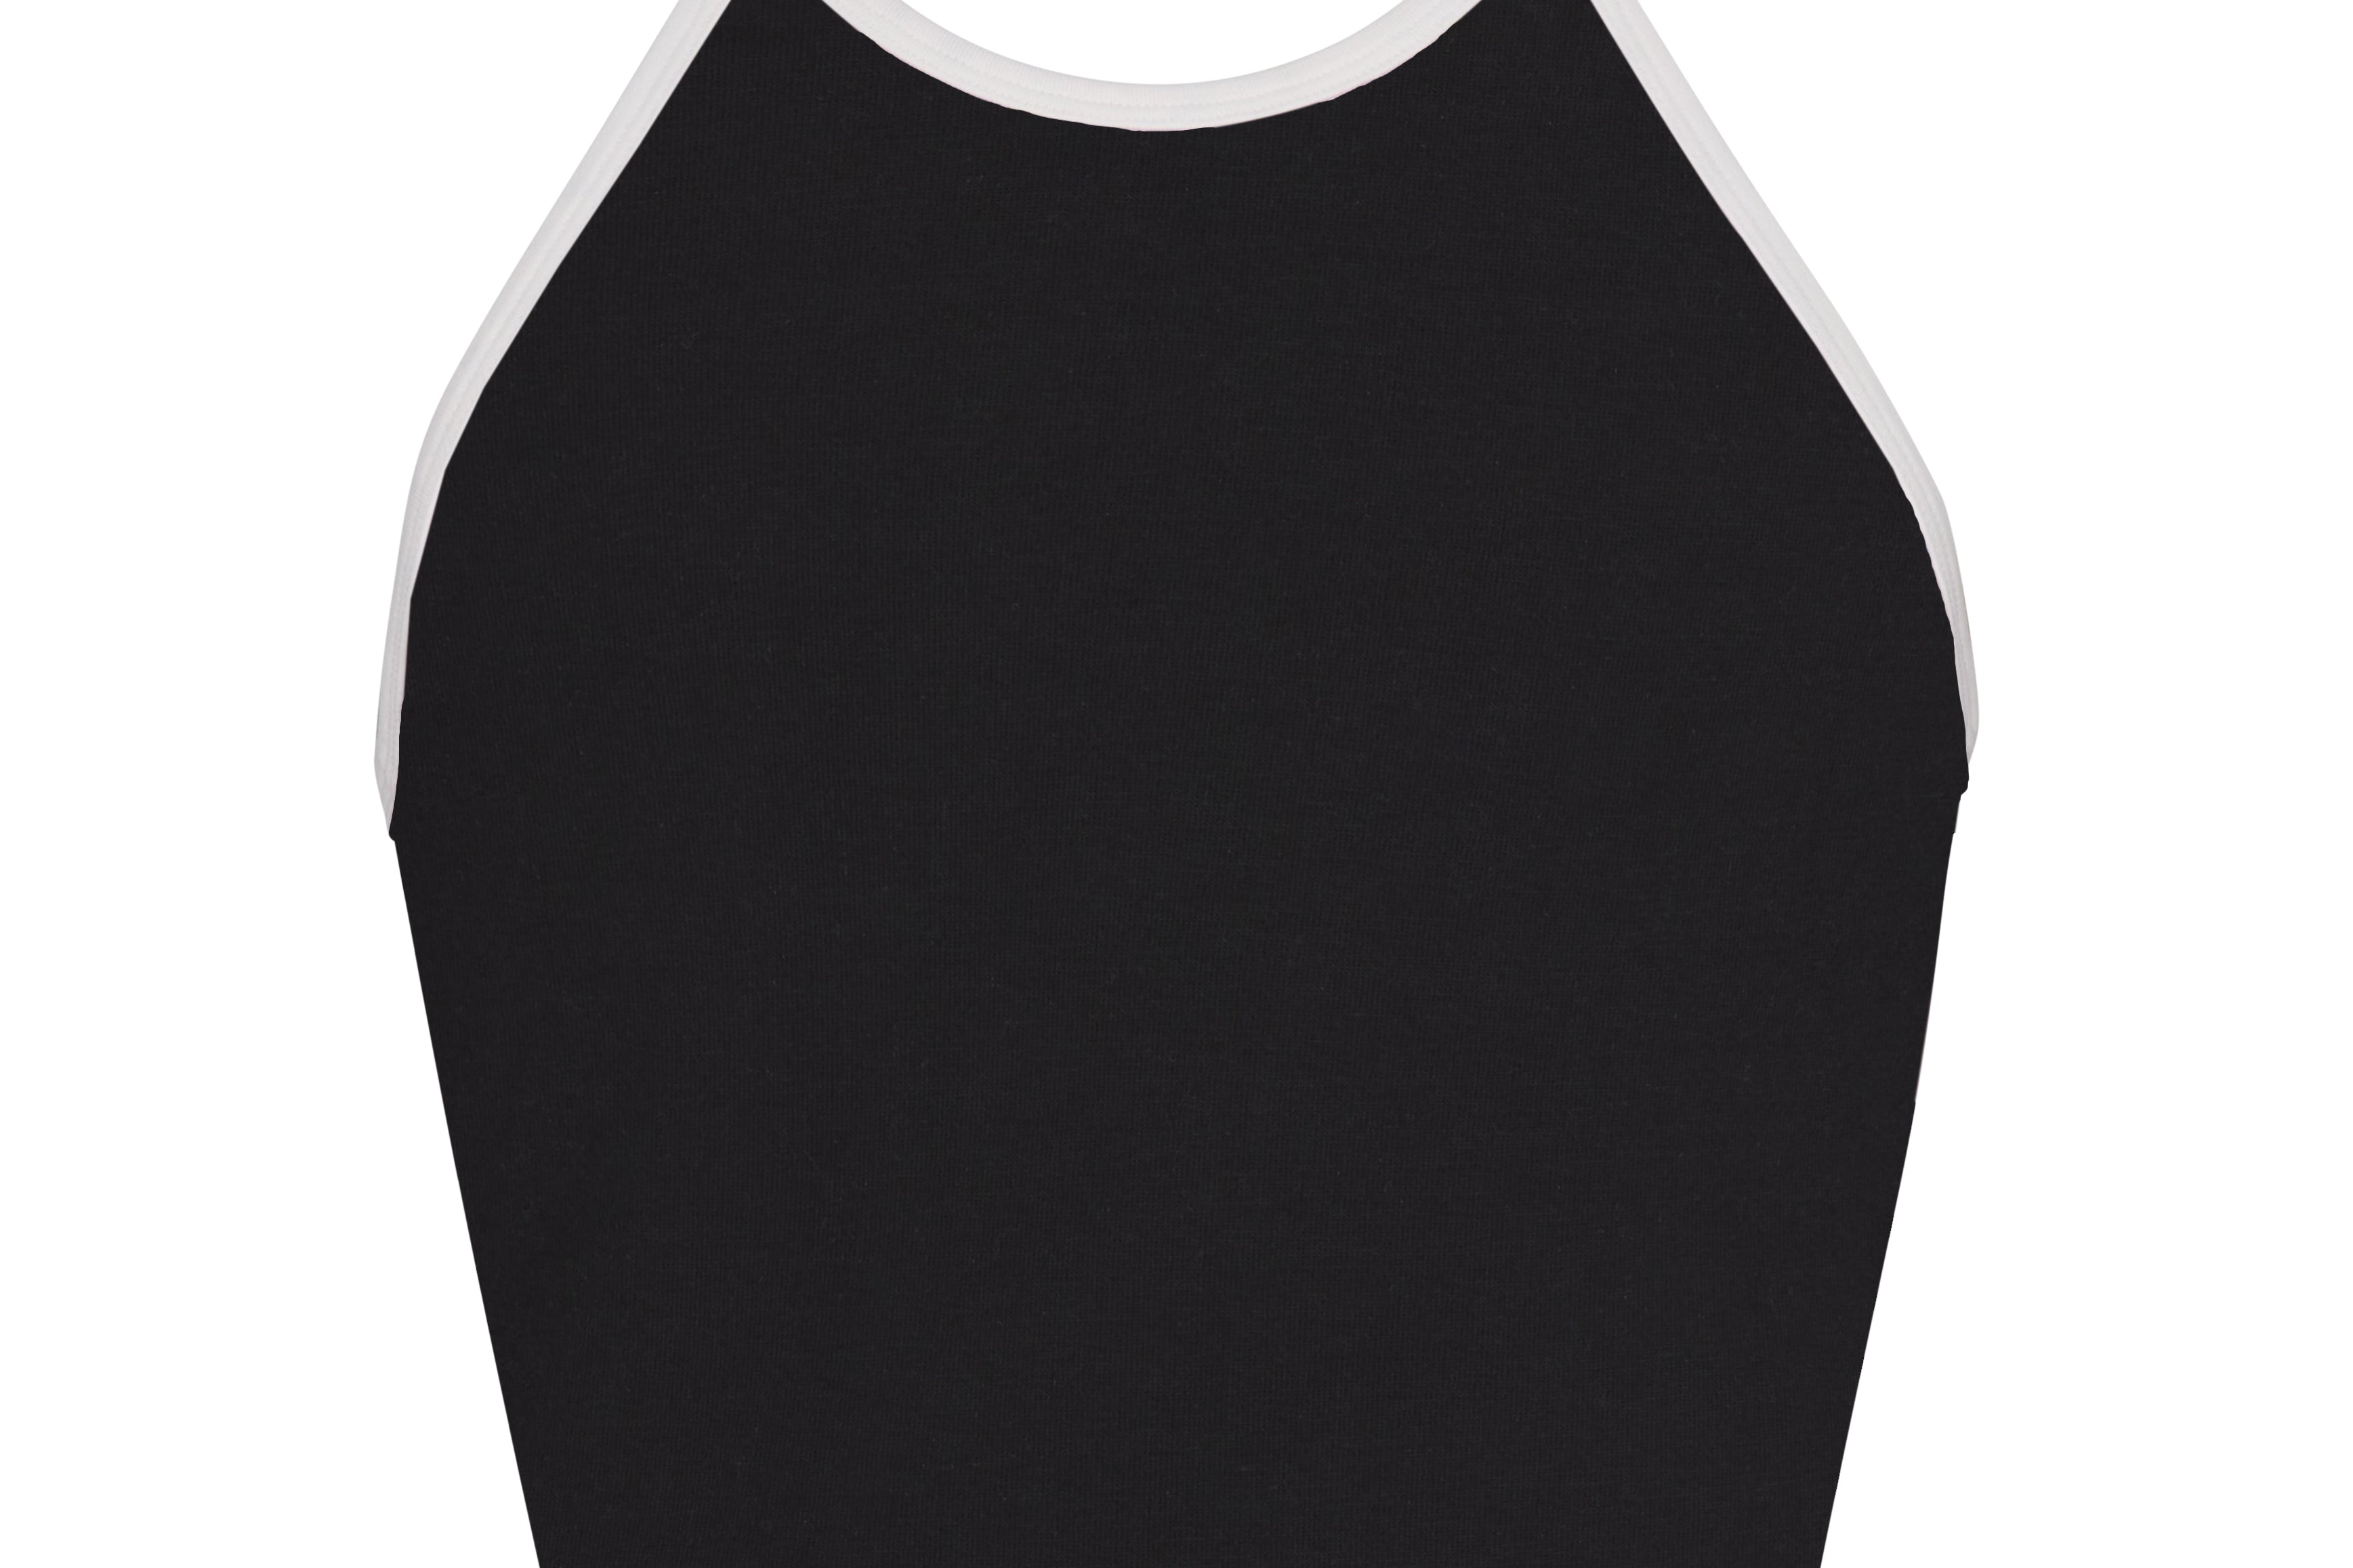 LINED CONTRAST HALTER TOP IN ONYX